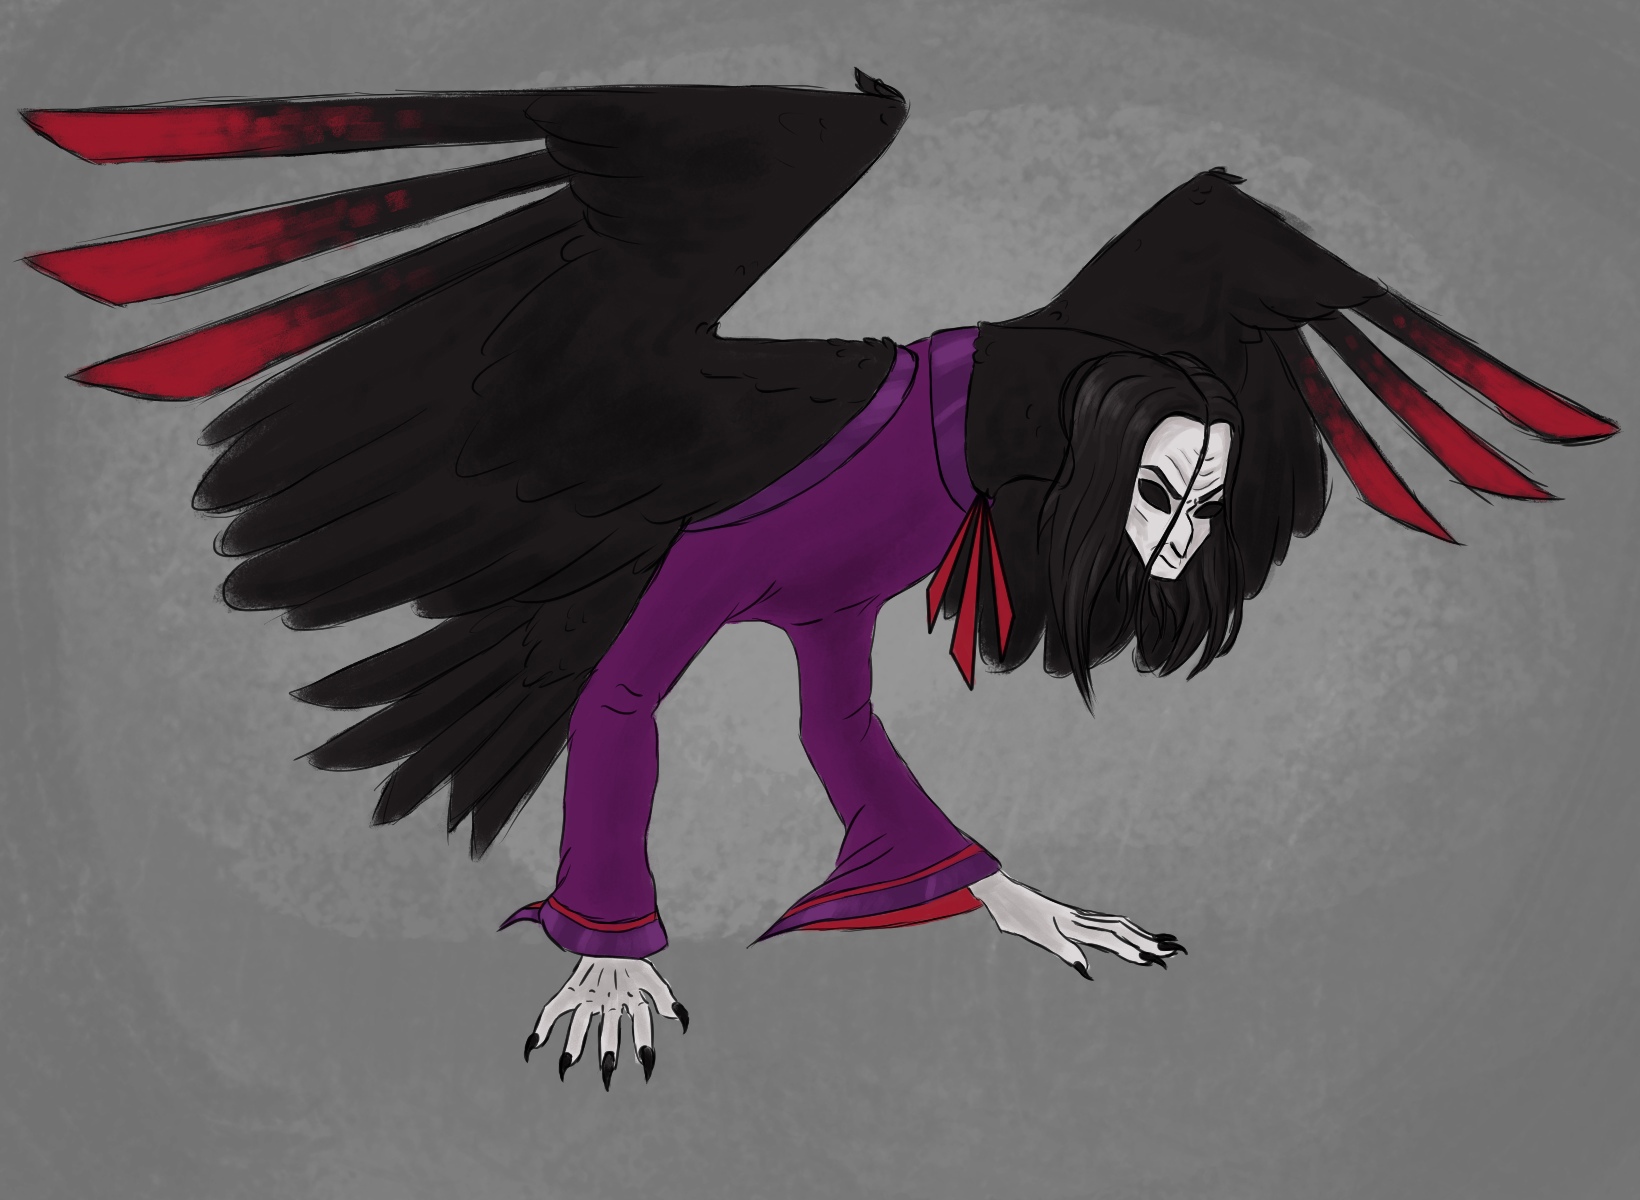 Master Raven, a big corvid-shaped creature with the body of a raven, human hands for feet and the head of an thin old man with all-black eyes and long black hair, in a purple coat